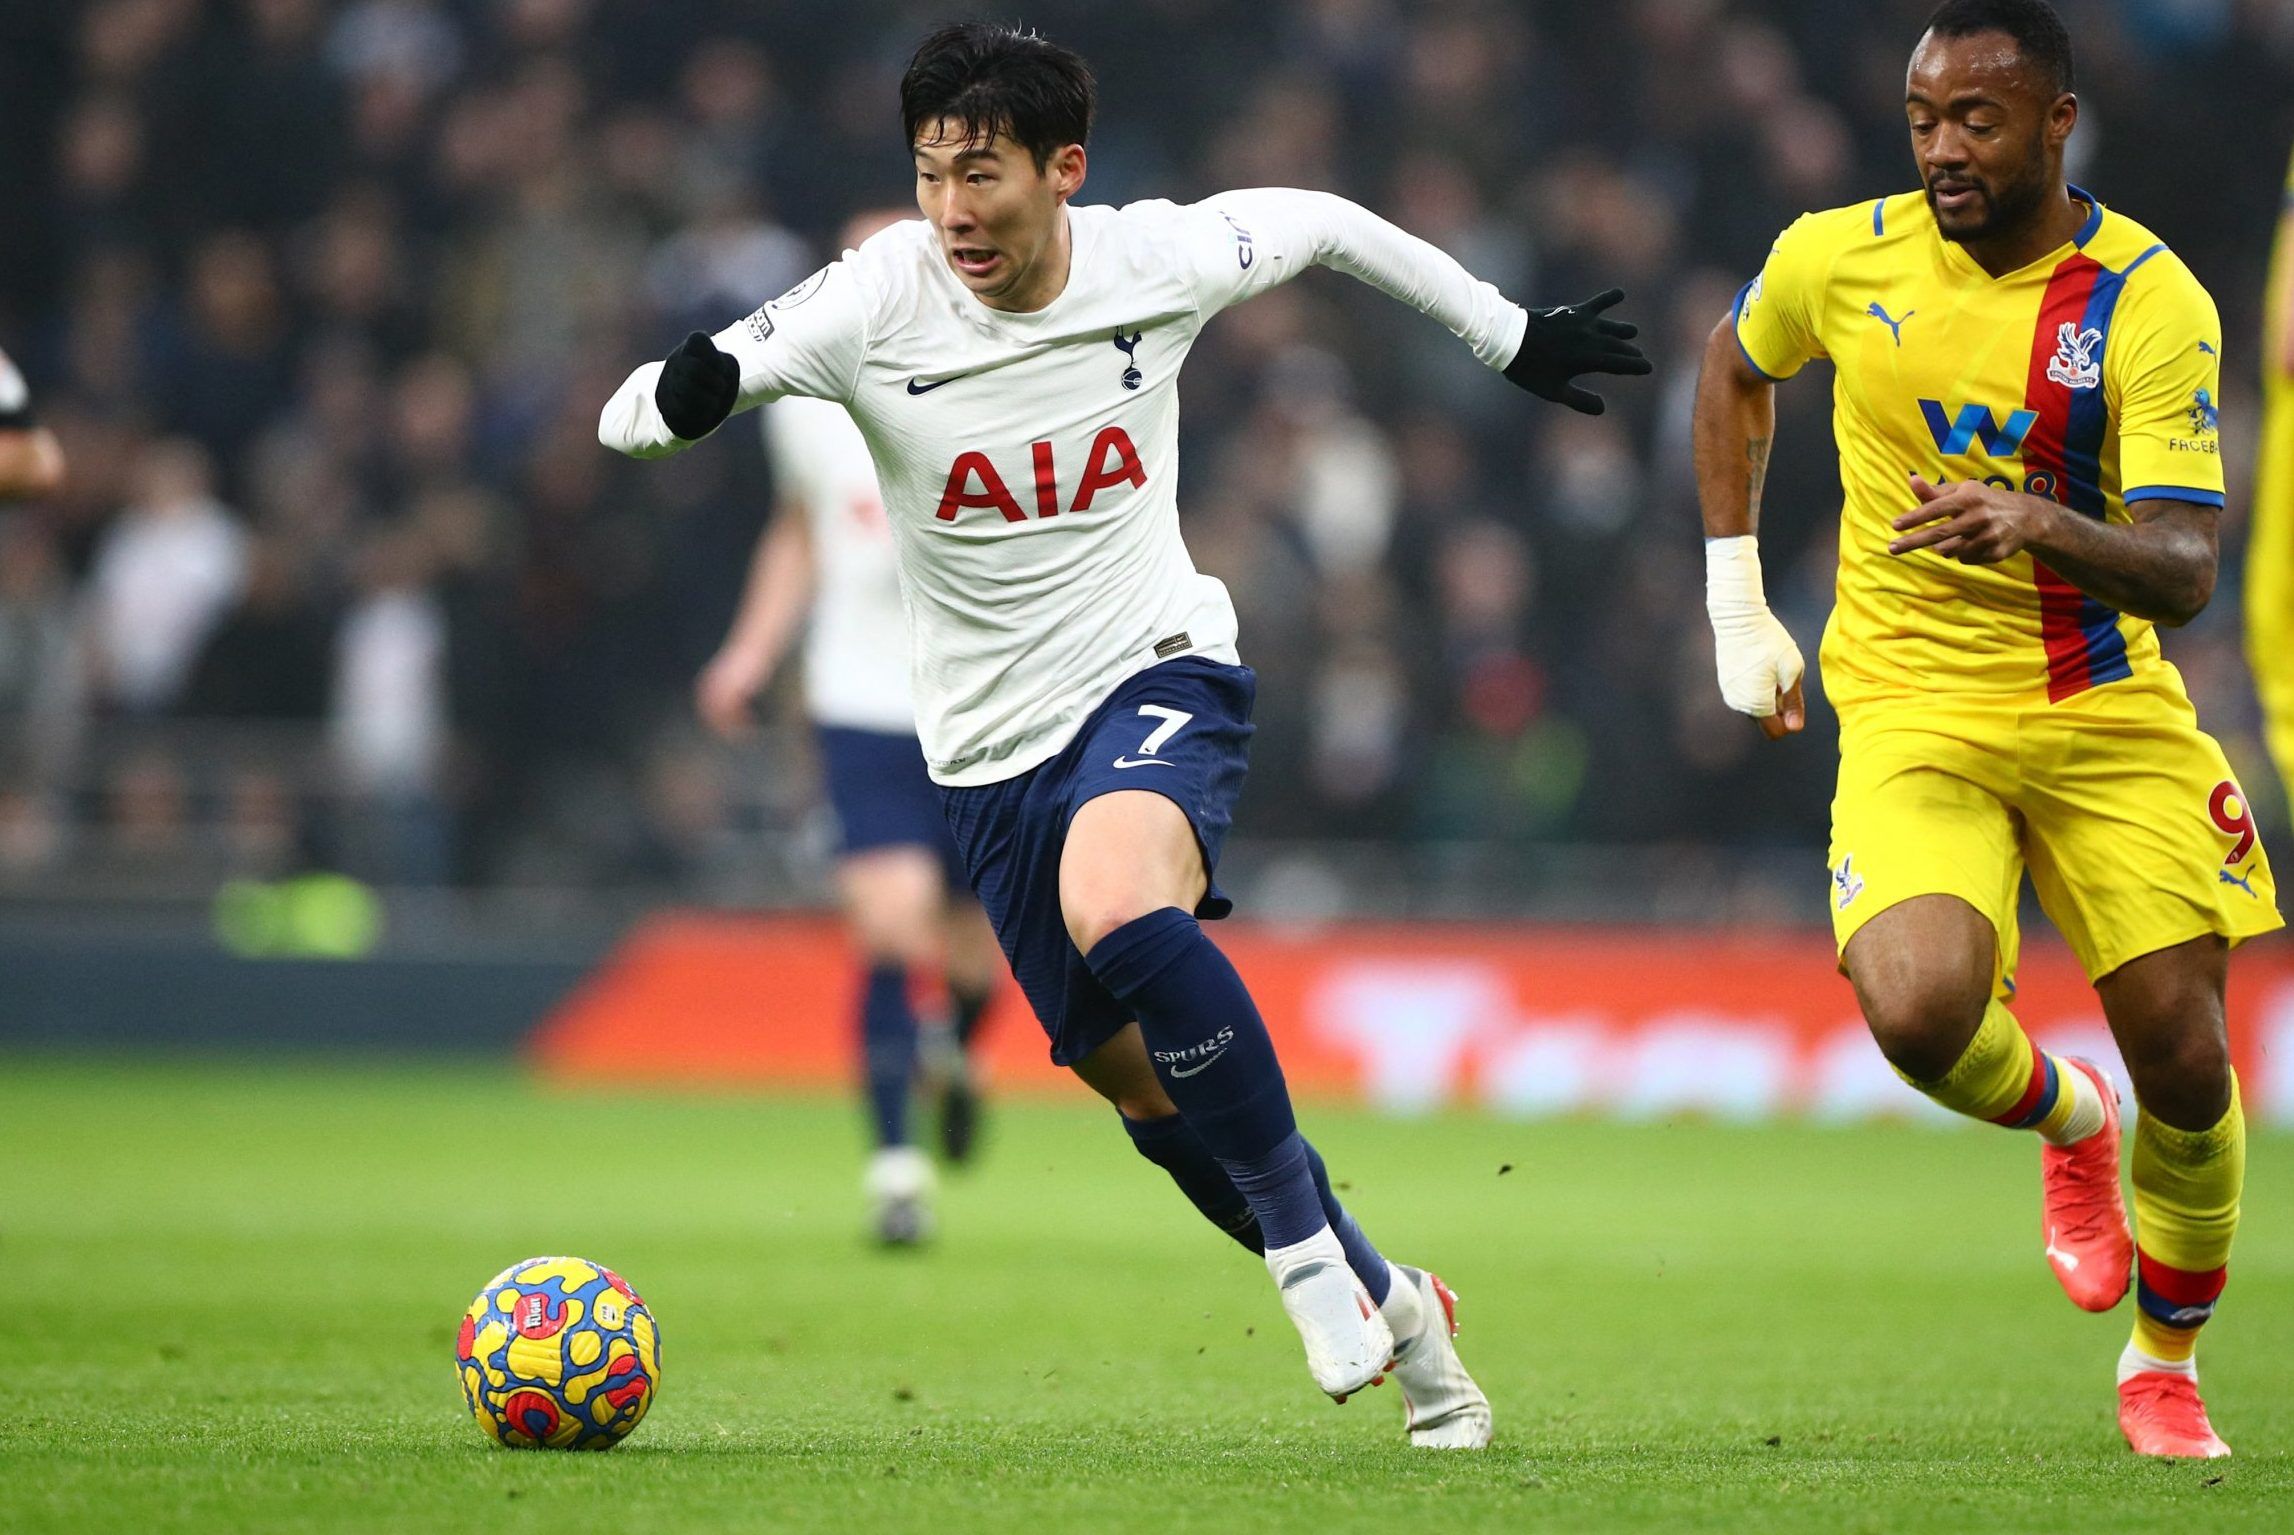 Spurs star Heung-min Son on the ball against Crystal Palace in the Premier League